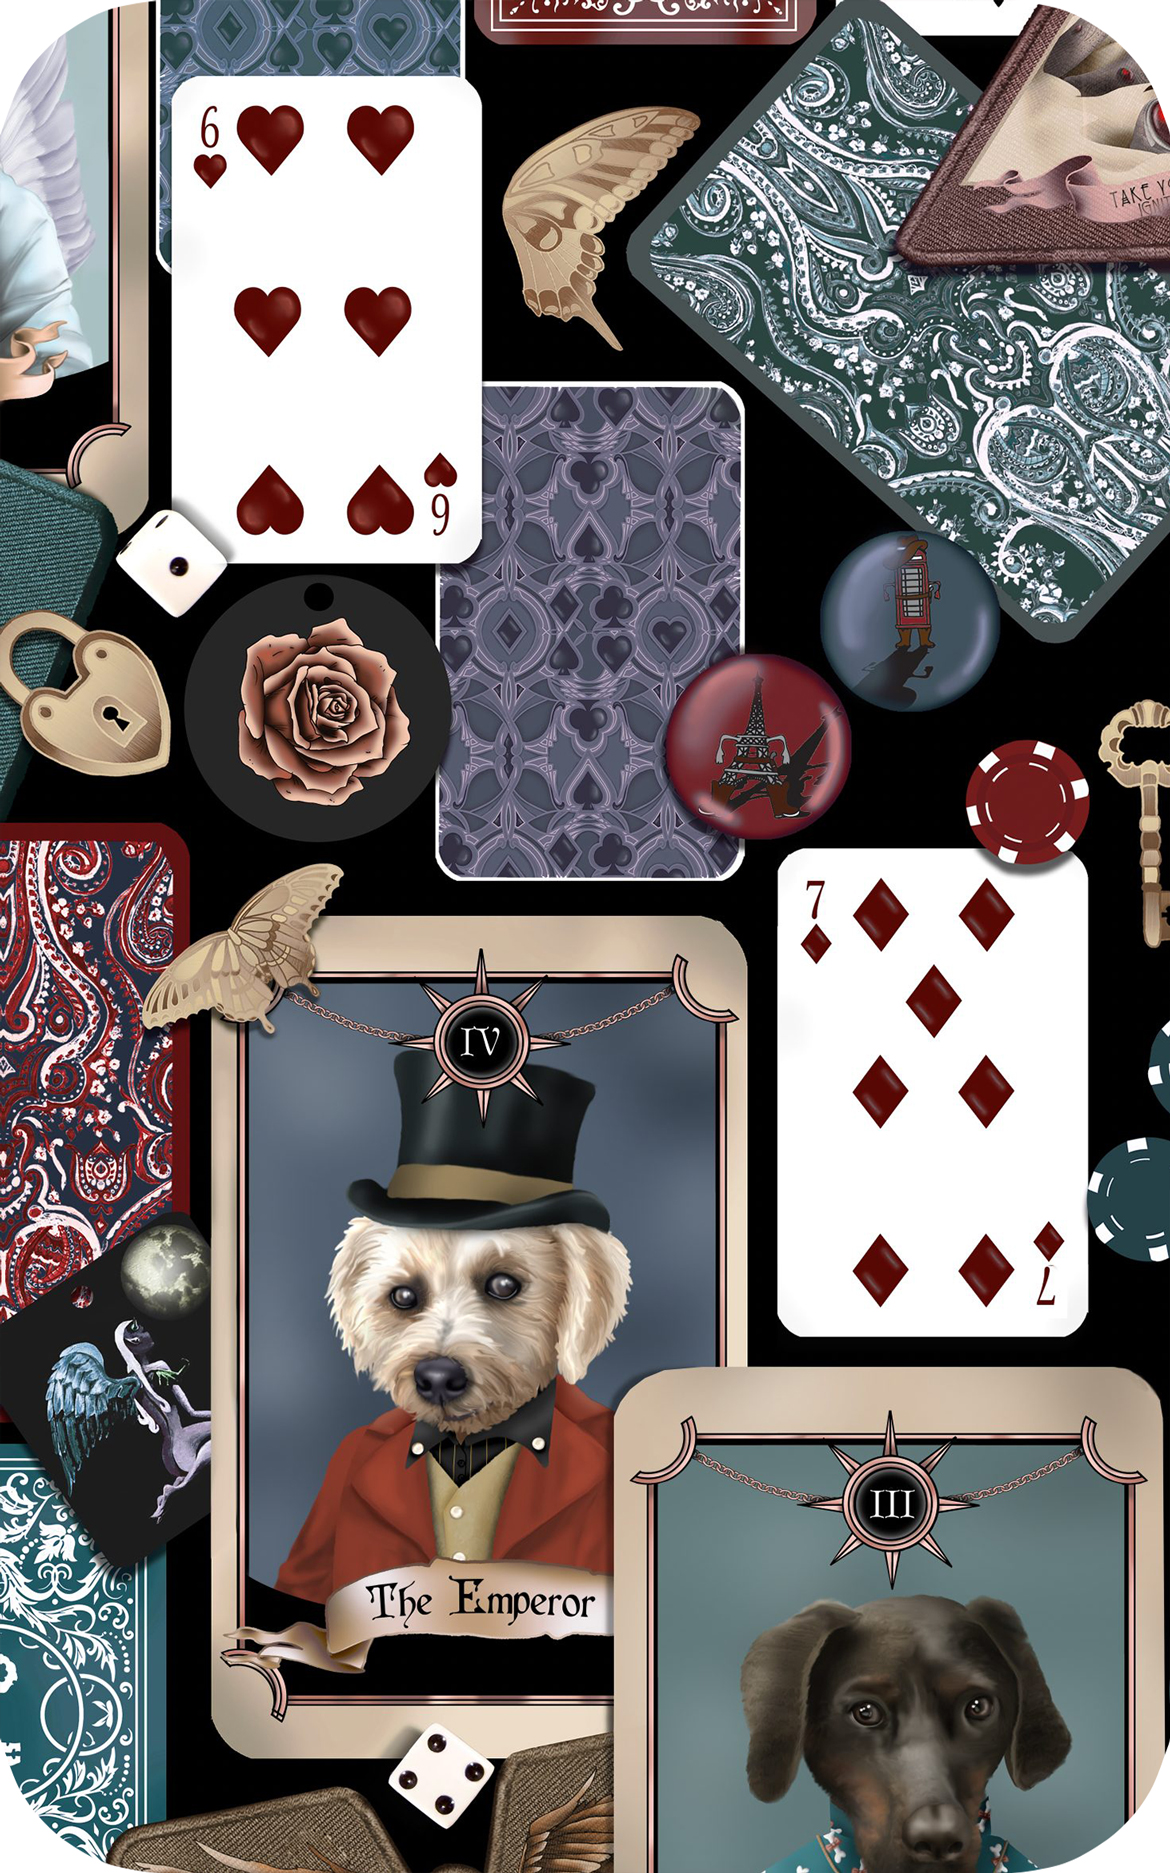 pooch portrait dog poker game quirky funky conversational wallpaper wacky 